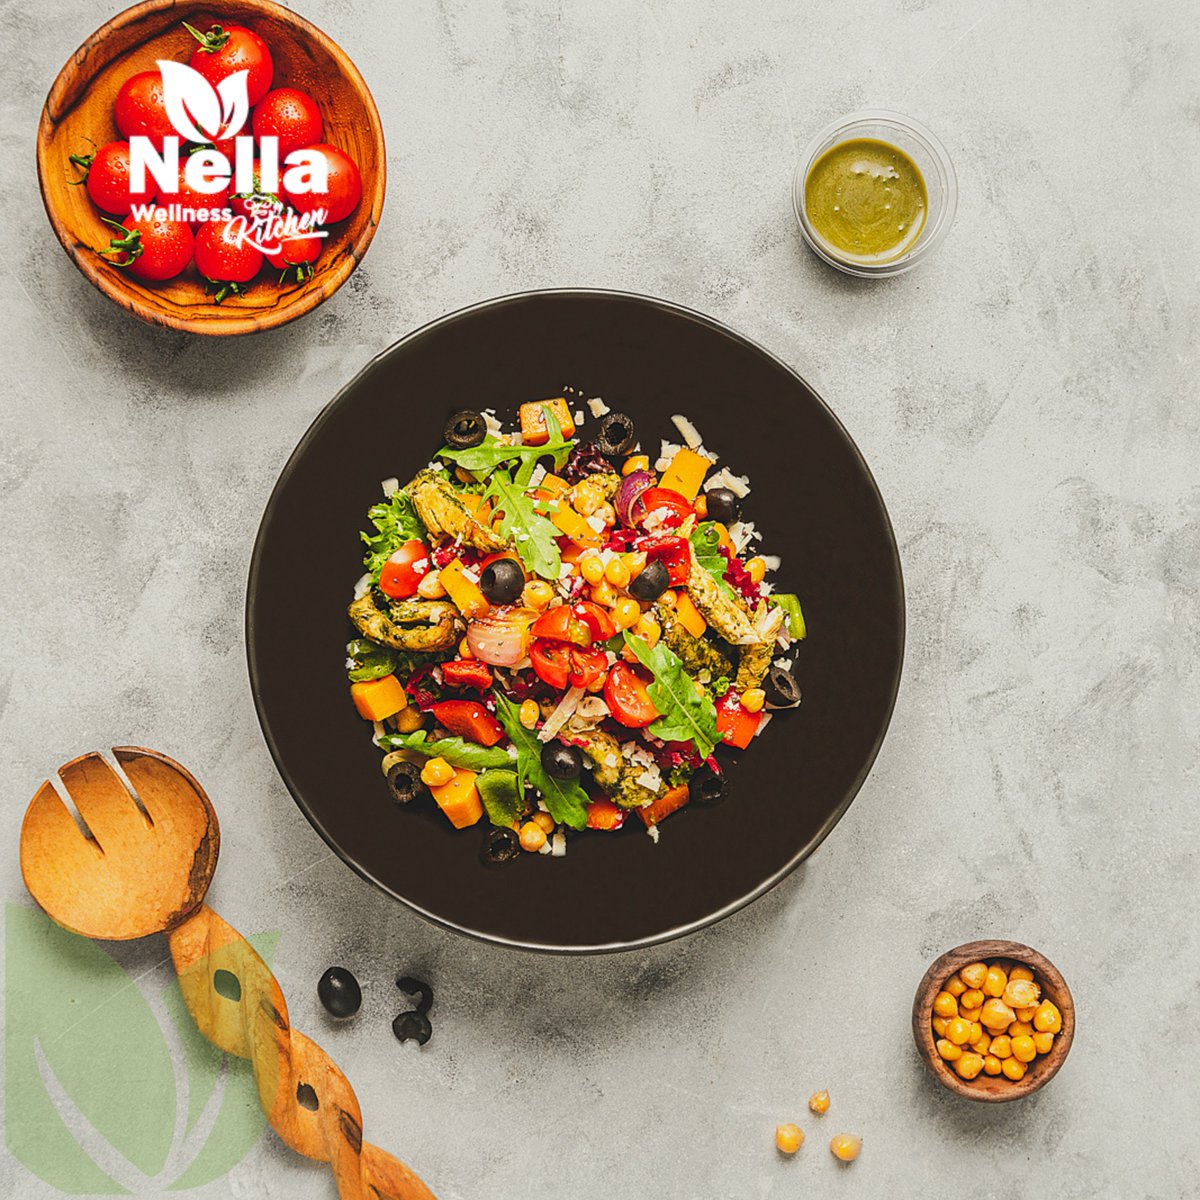 Reach for something healthy every day with Nella, with options for everyone. Always fresh! Start now! Call:0741222333 #HealthyFood #wellness360